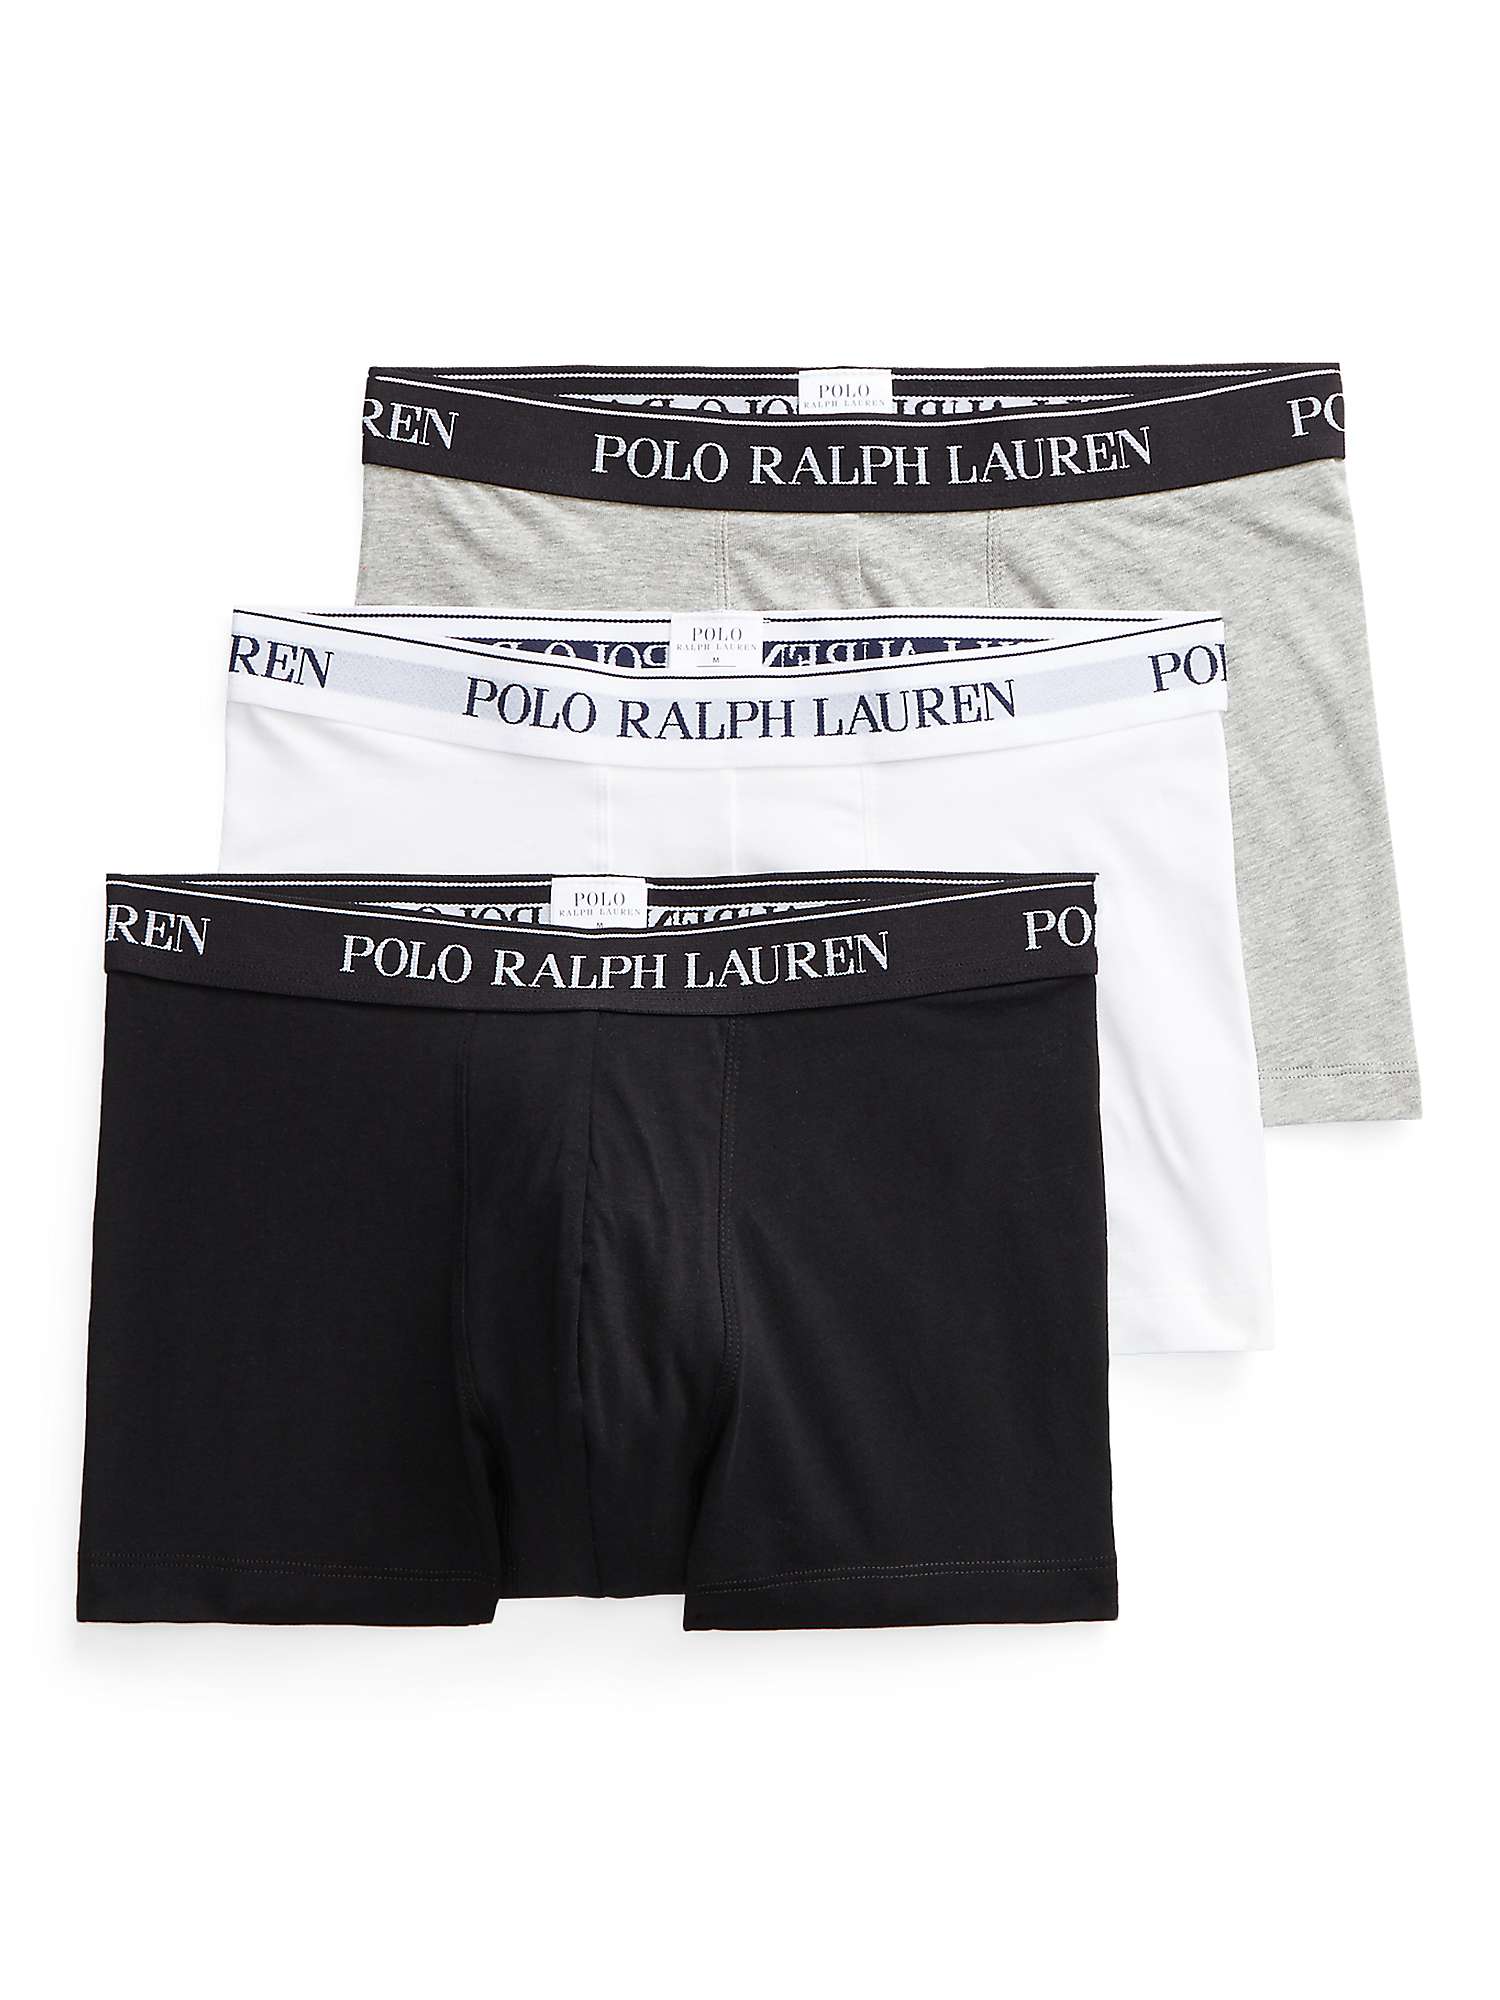 Buy Polo Ralph Lauren Cotton Trunks, Pack of 3 Online at johnlewis.com